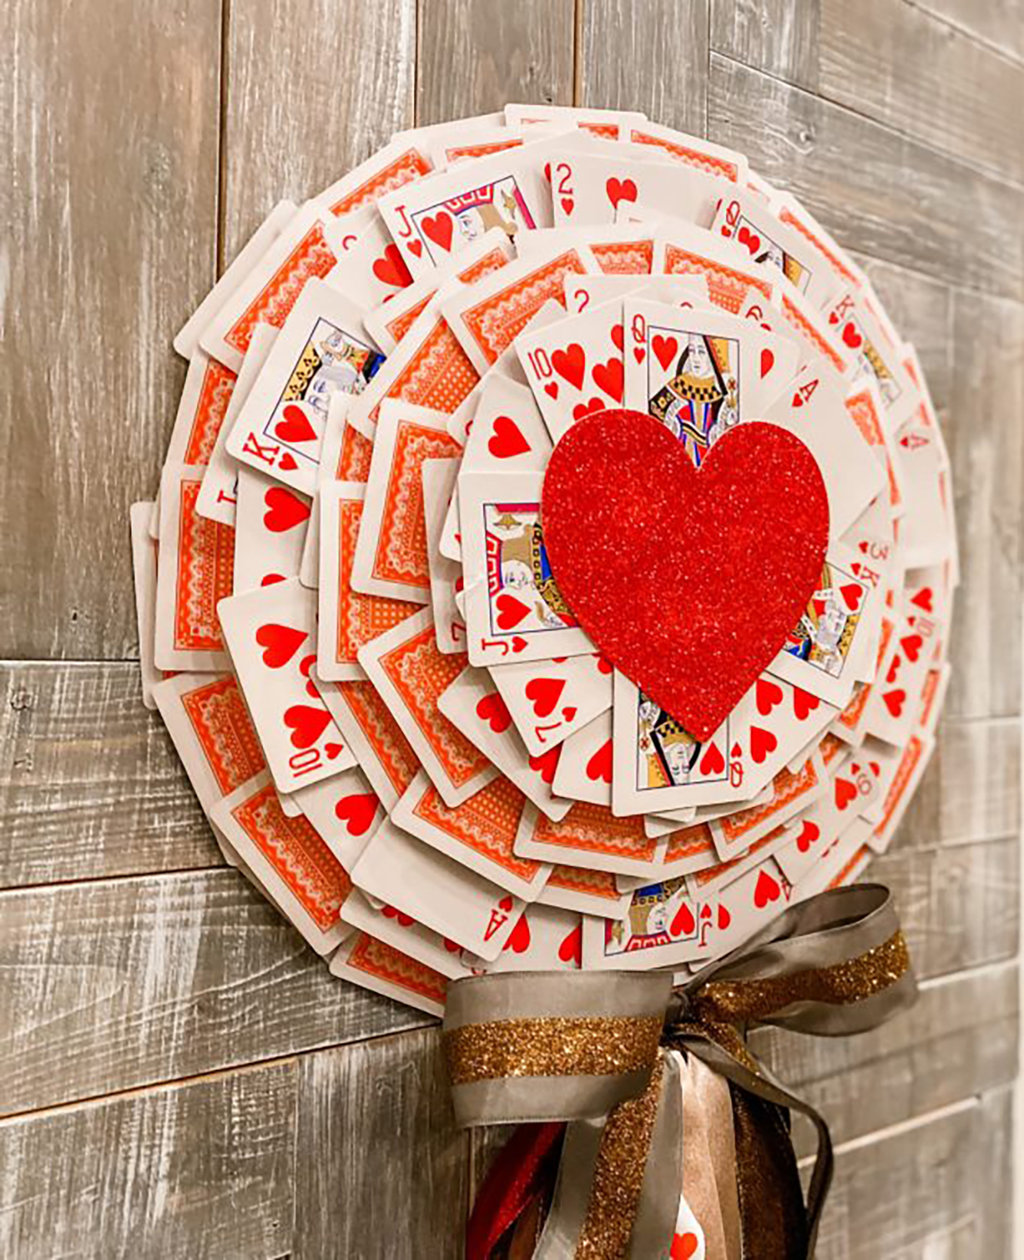 8 Lovely Valentine Crafts For Unique Gifts, Decorations And Cards